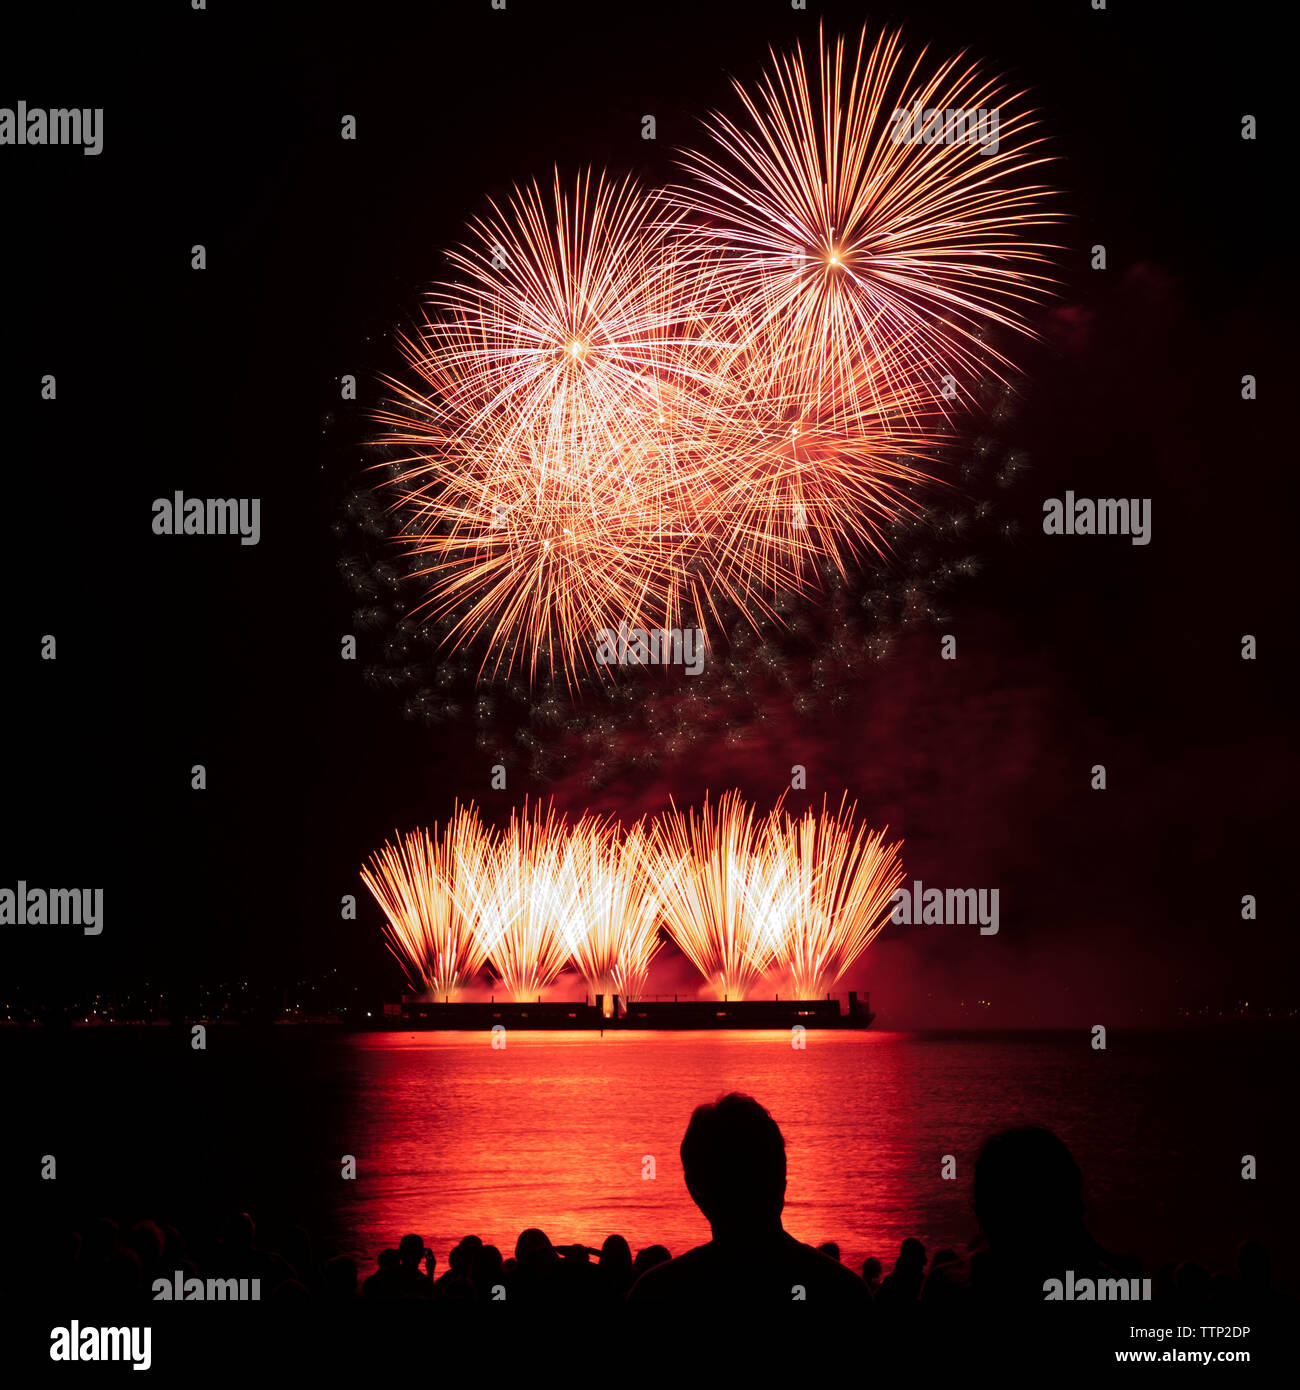 Silhouette people watching firework display over sea against sky at night Stock Photo